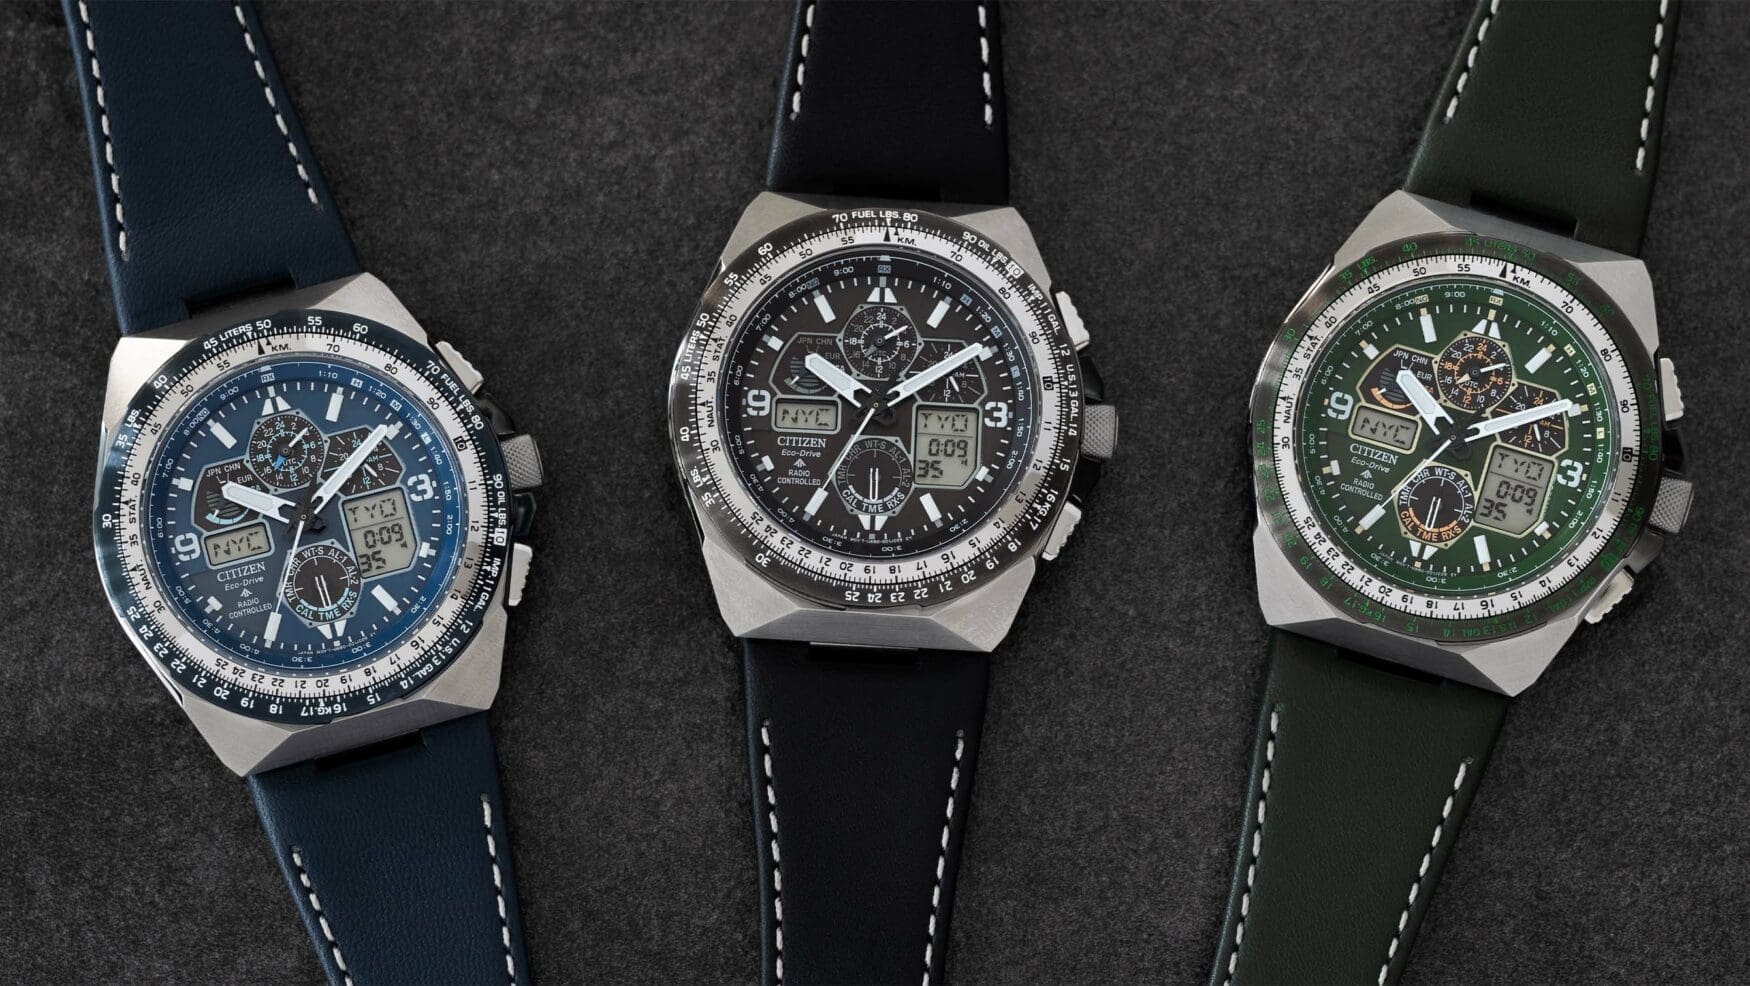 Take to sci-fi skies with the new Citizen Promaster Skyhawk collection